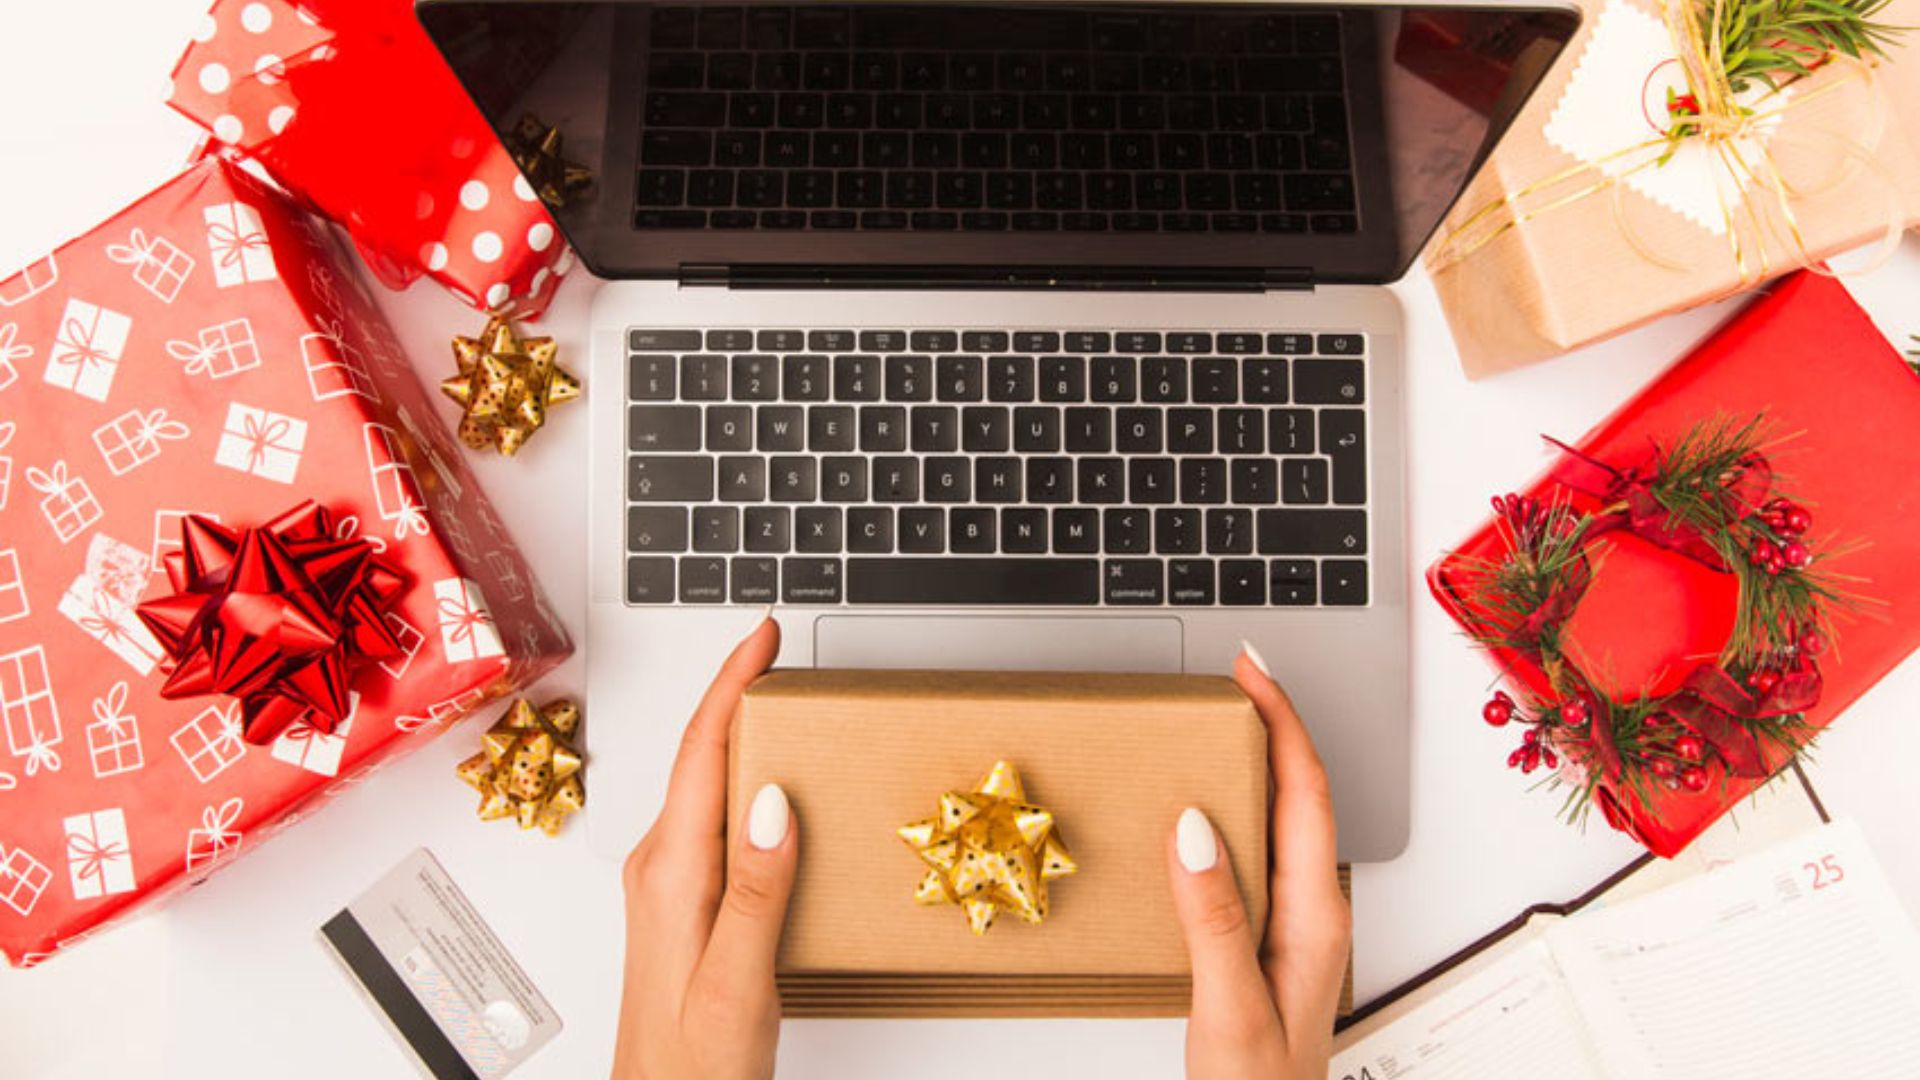 a laptop and a person holding a presents showing virtual presents